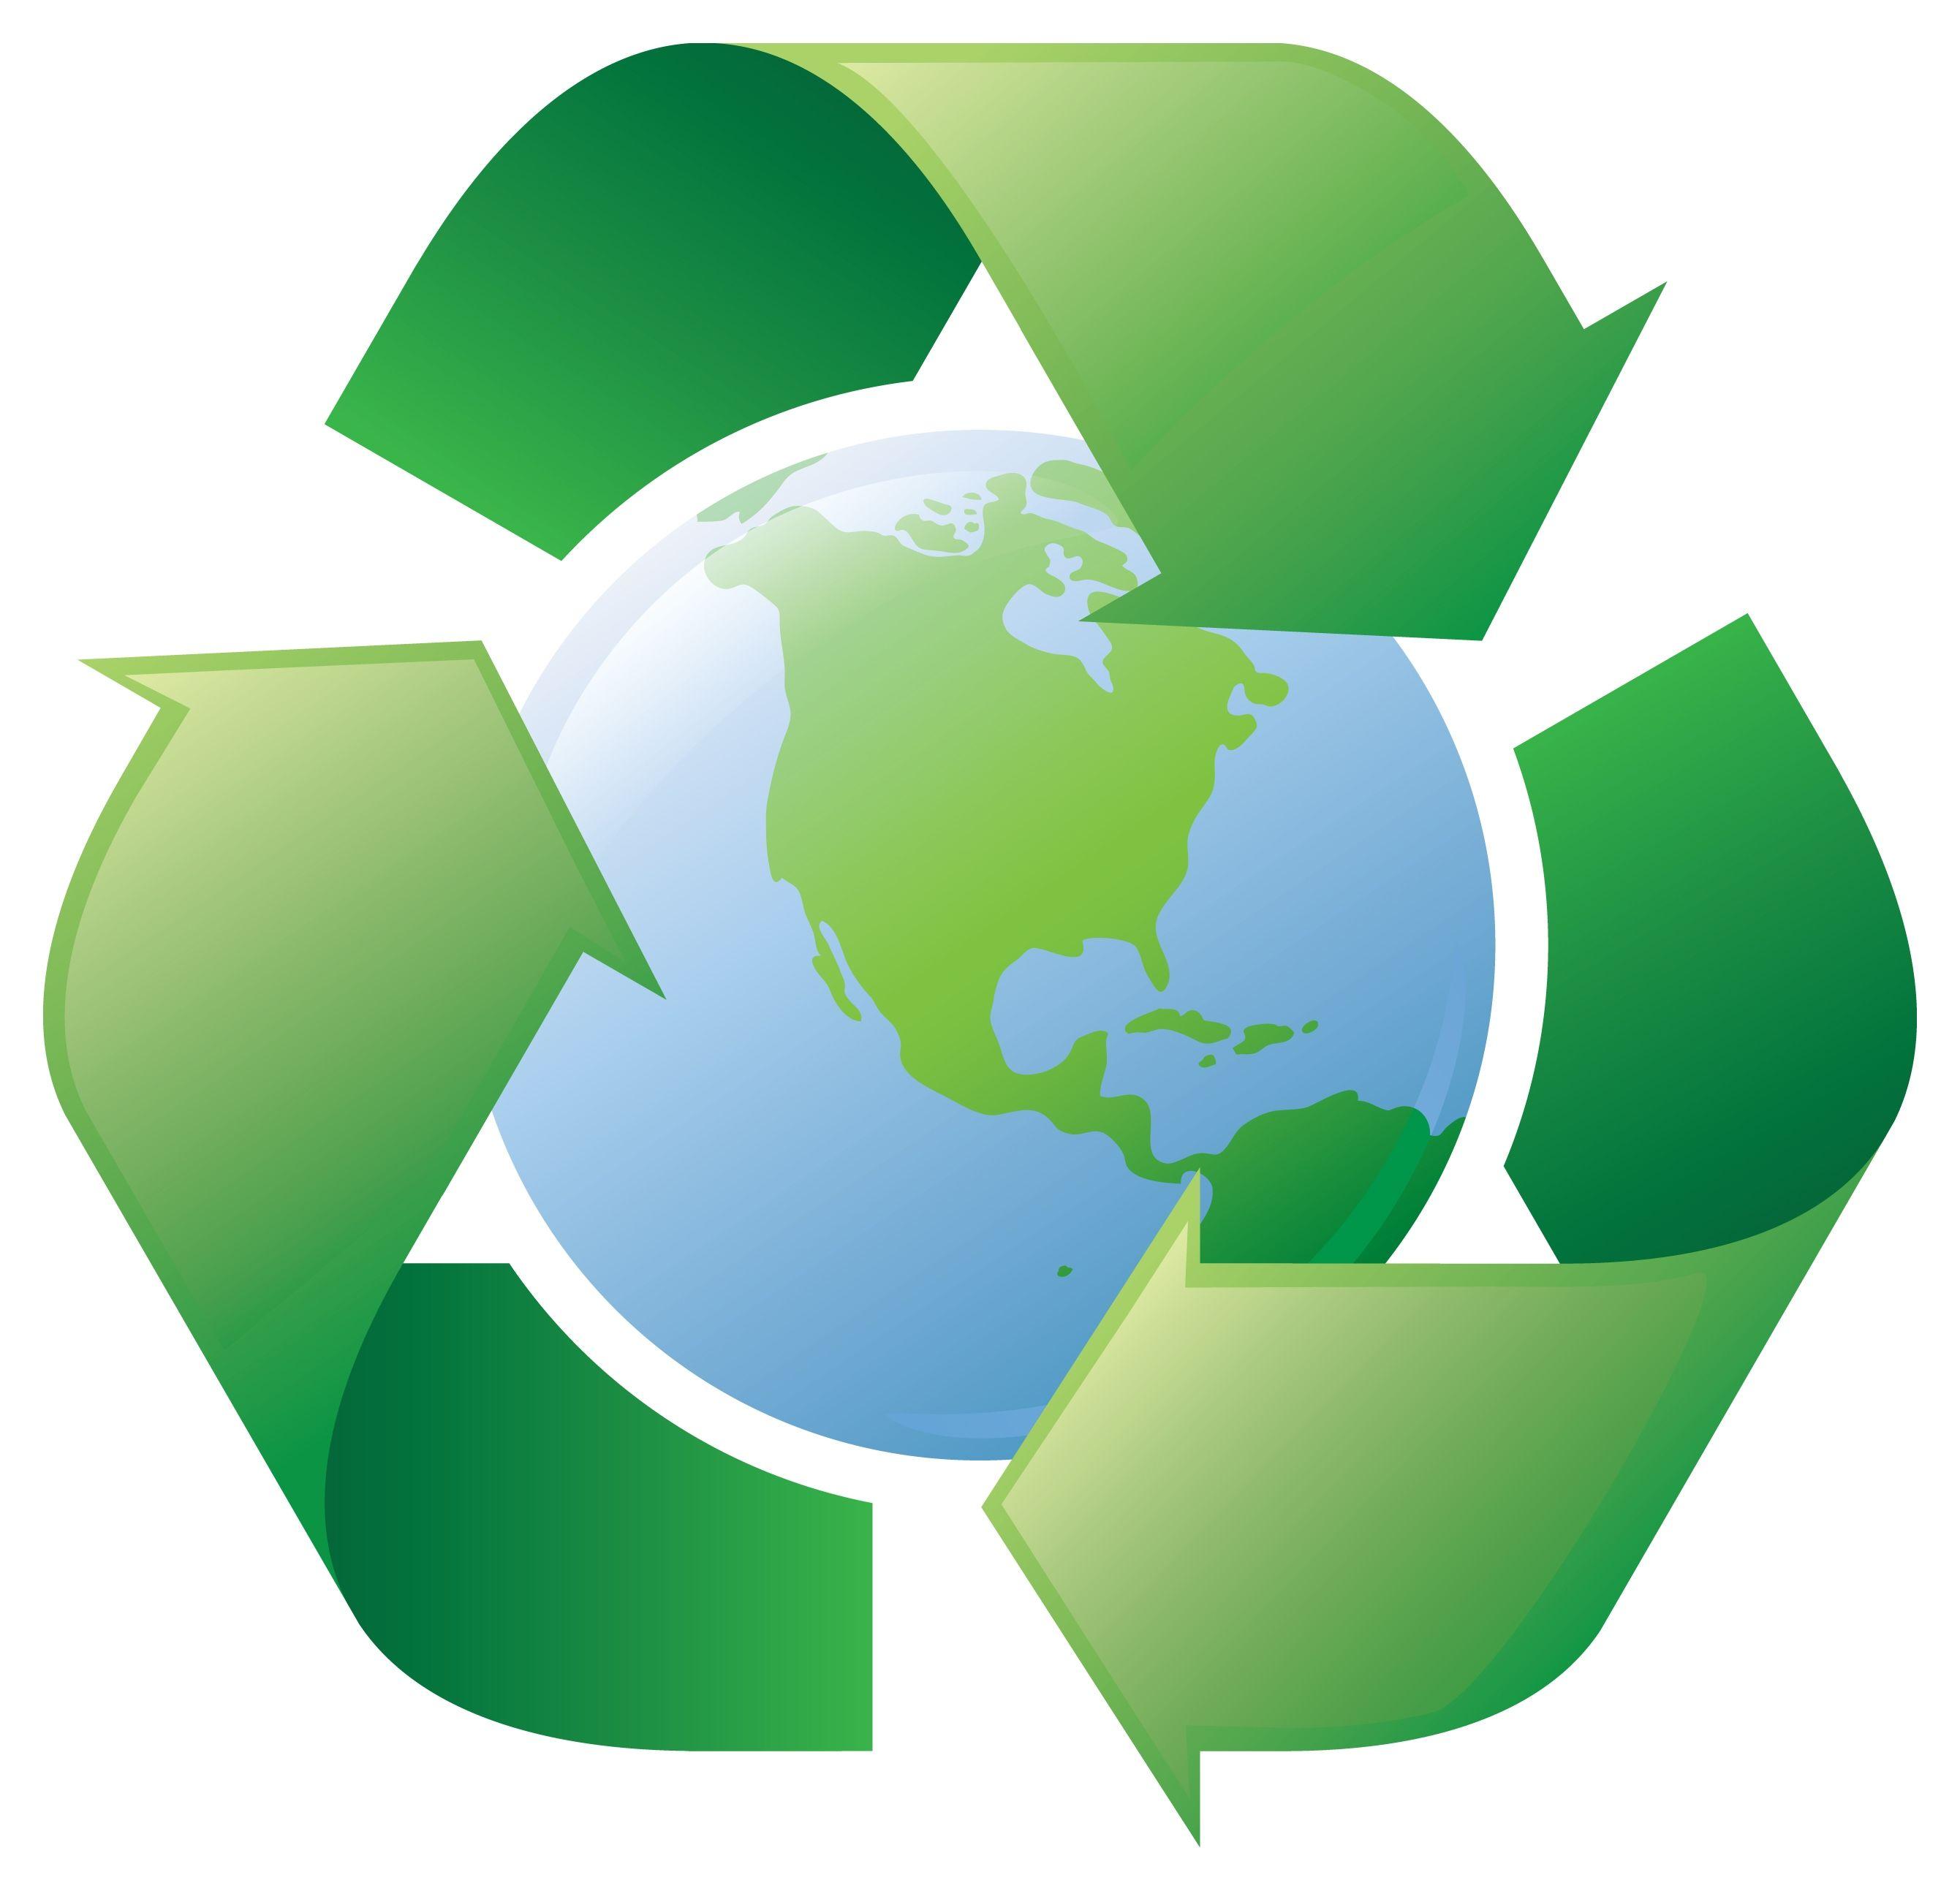 We Recycle Logo - Free Recycle Symbol, Download Free Clip Art, Free Clip Art